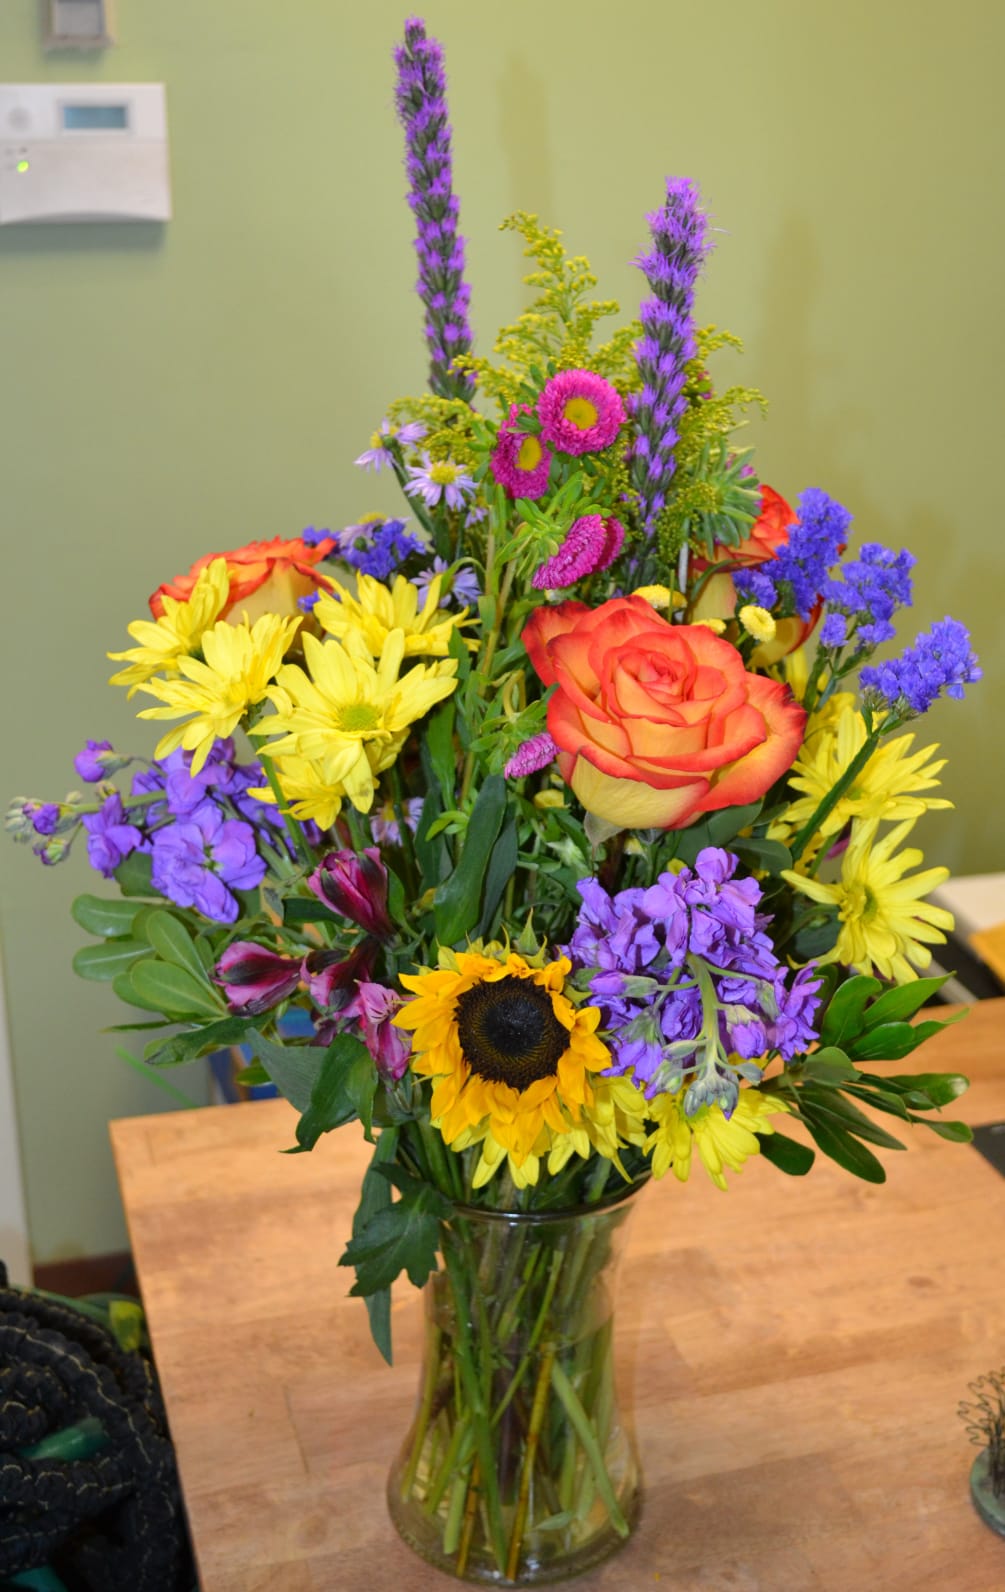 Roses, Sunflowers, Stock, Liatris, Yellow Daisies and more in this perfect springtime